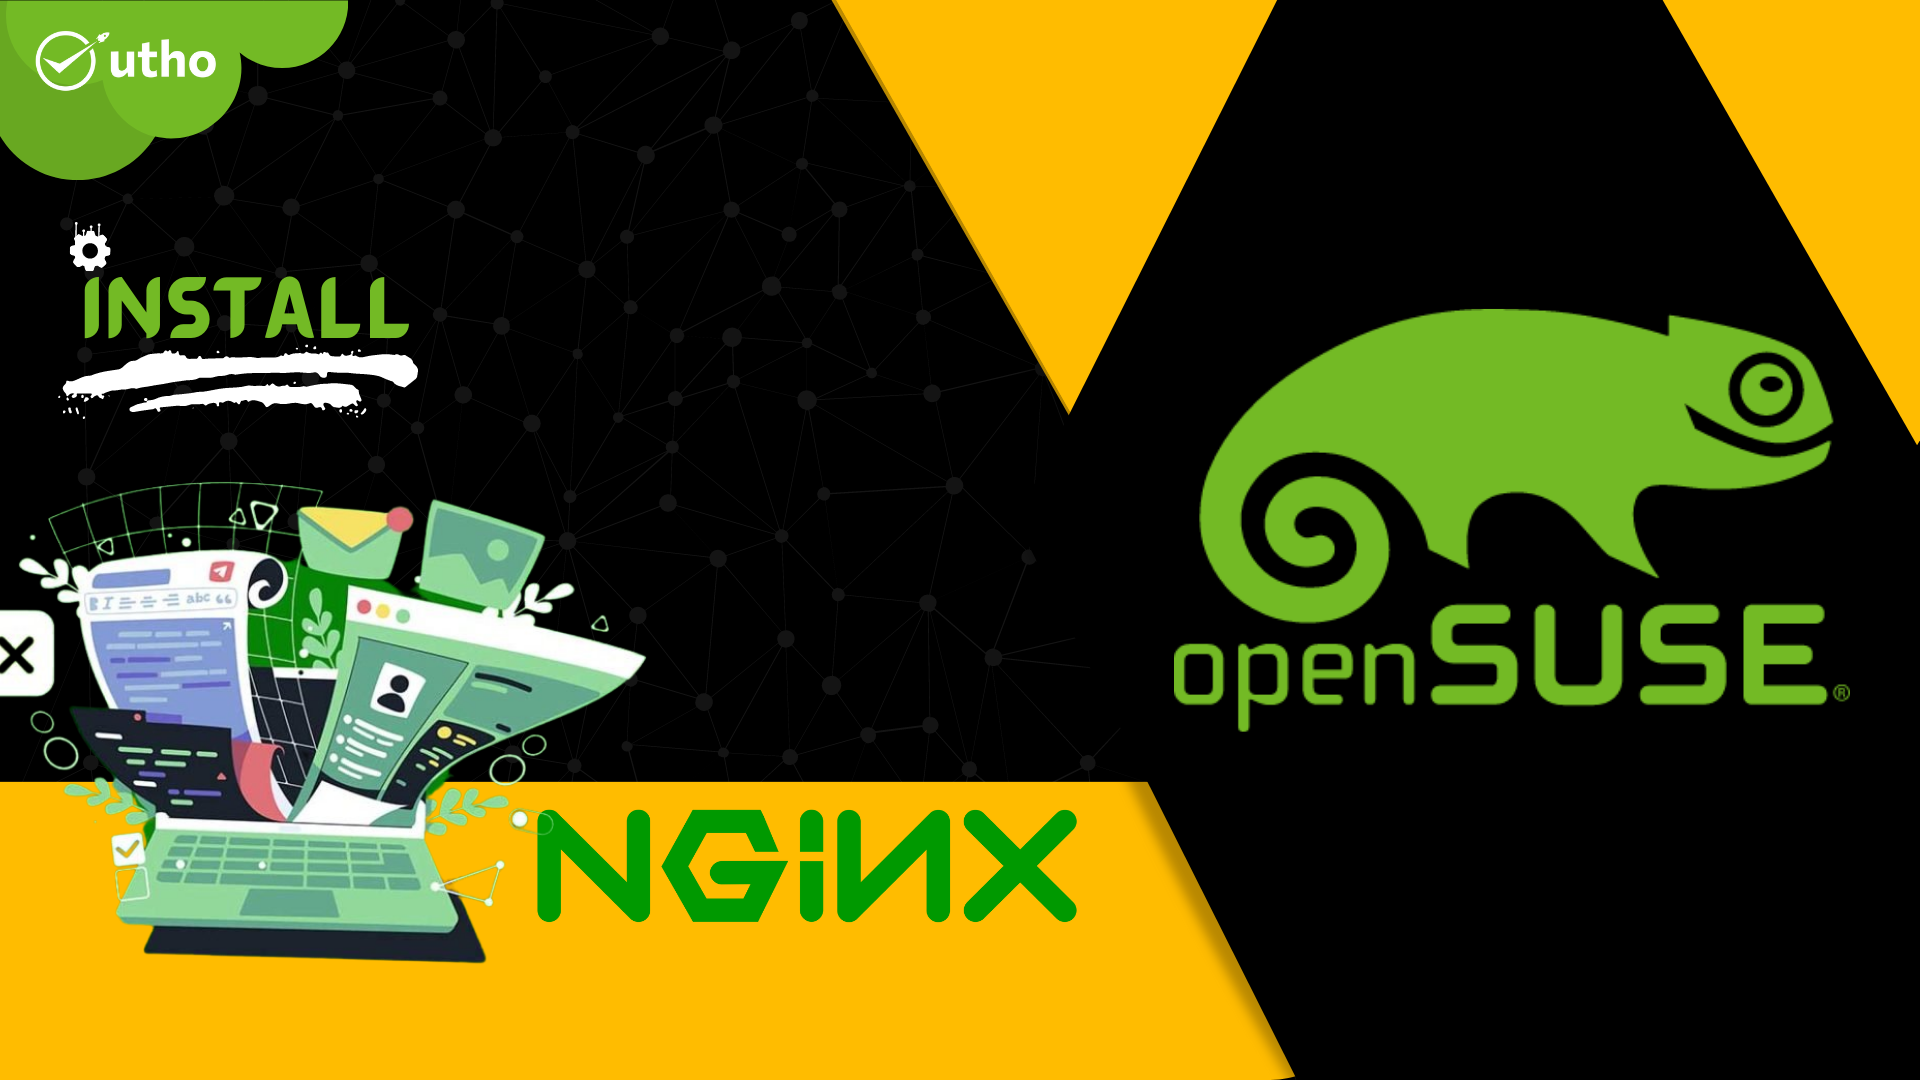 How to install NGINX on OpenSUSE